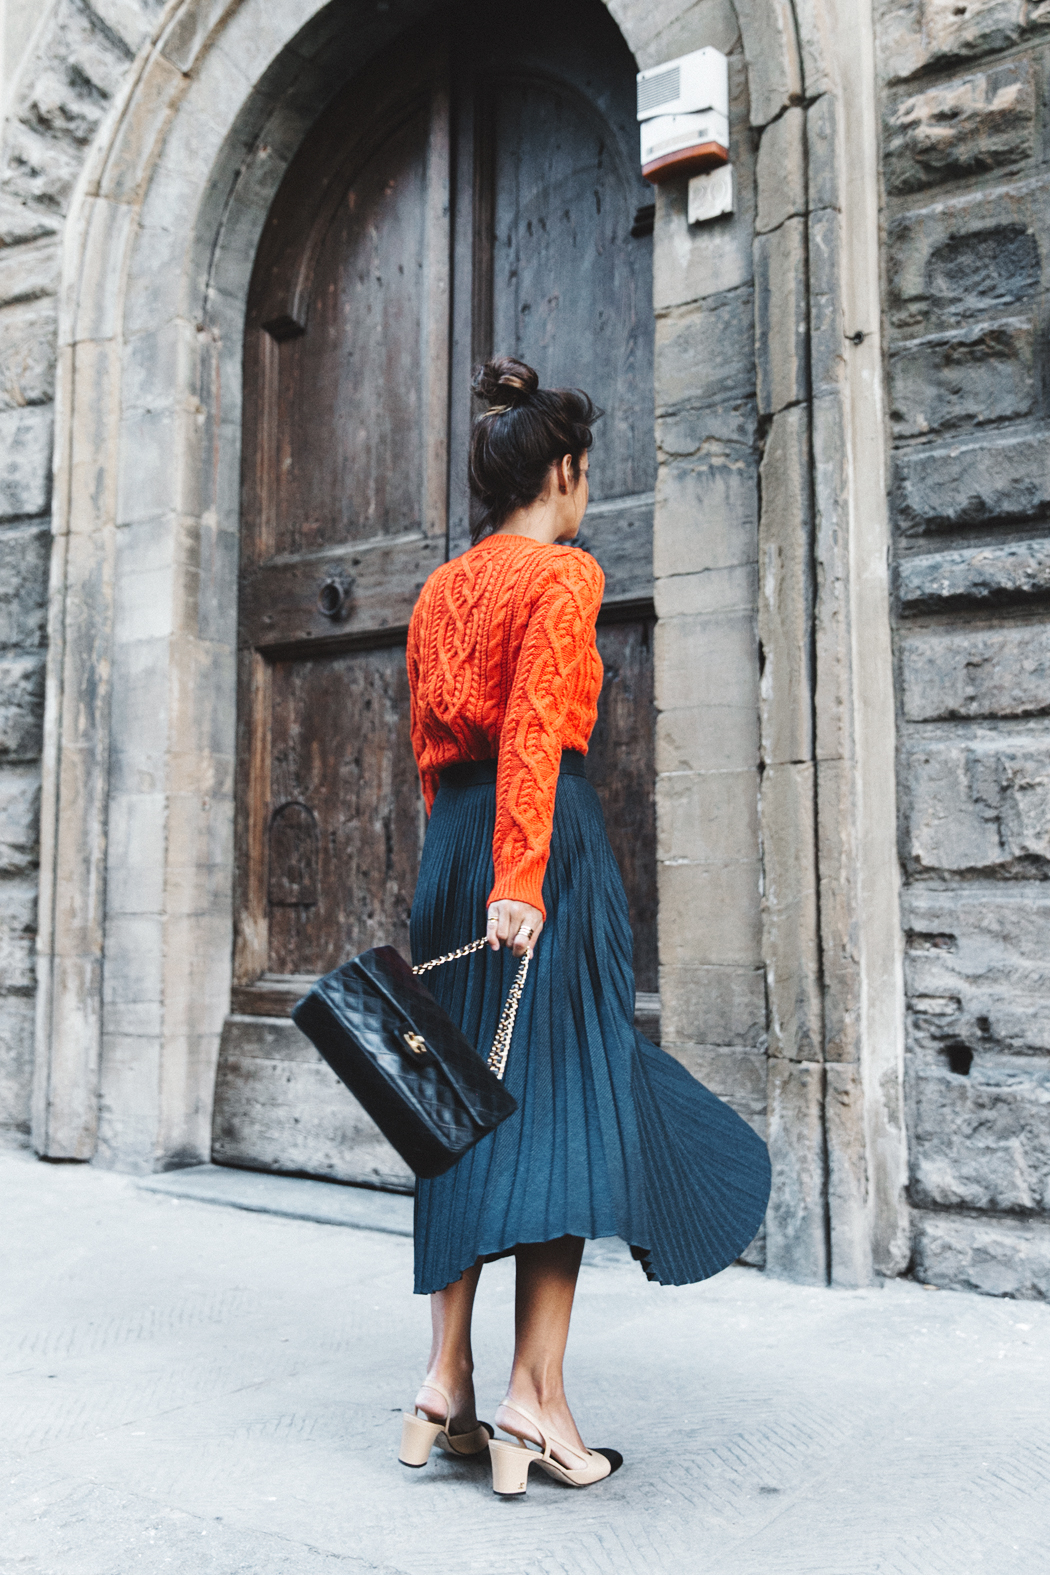 Orange_Sweater-Midi_Skirt-Slingback_Shoes_Chanel-Vintage_Bag-Florence-Outfit-Street_Style-7